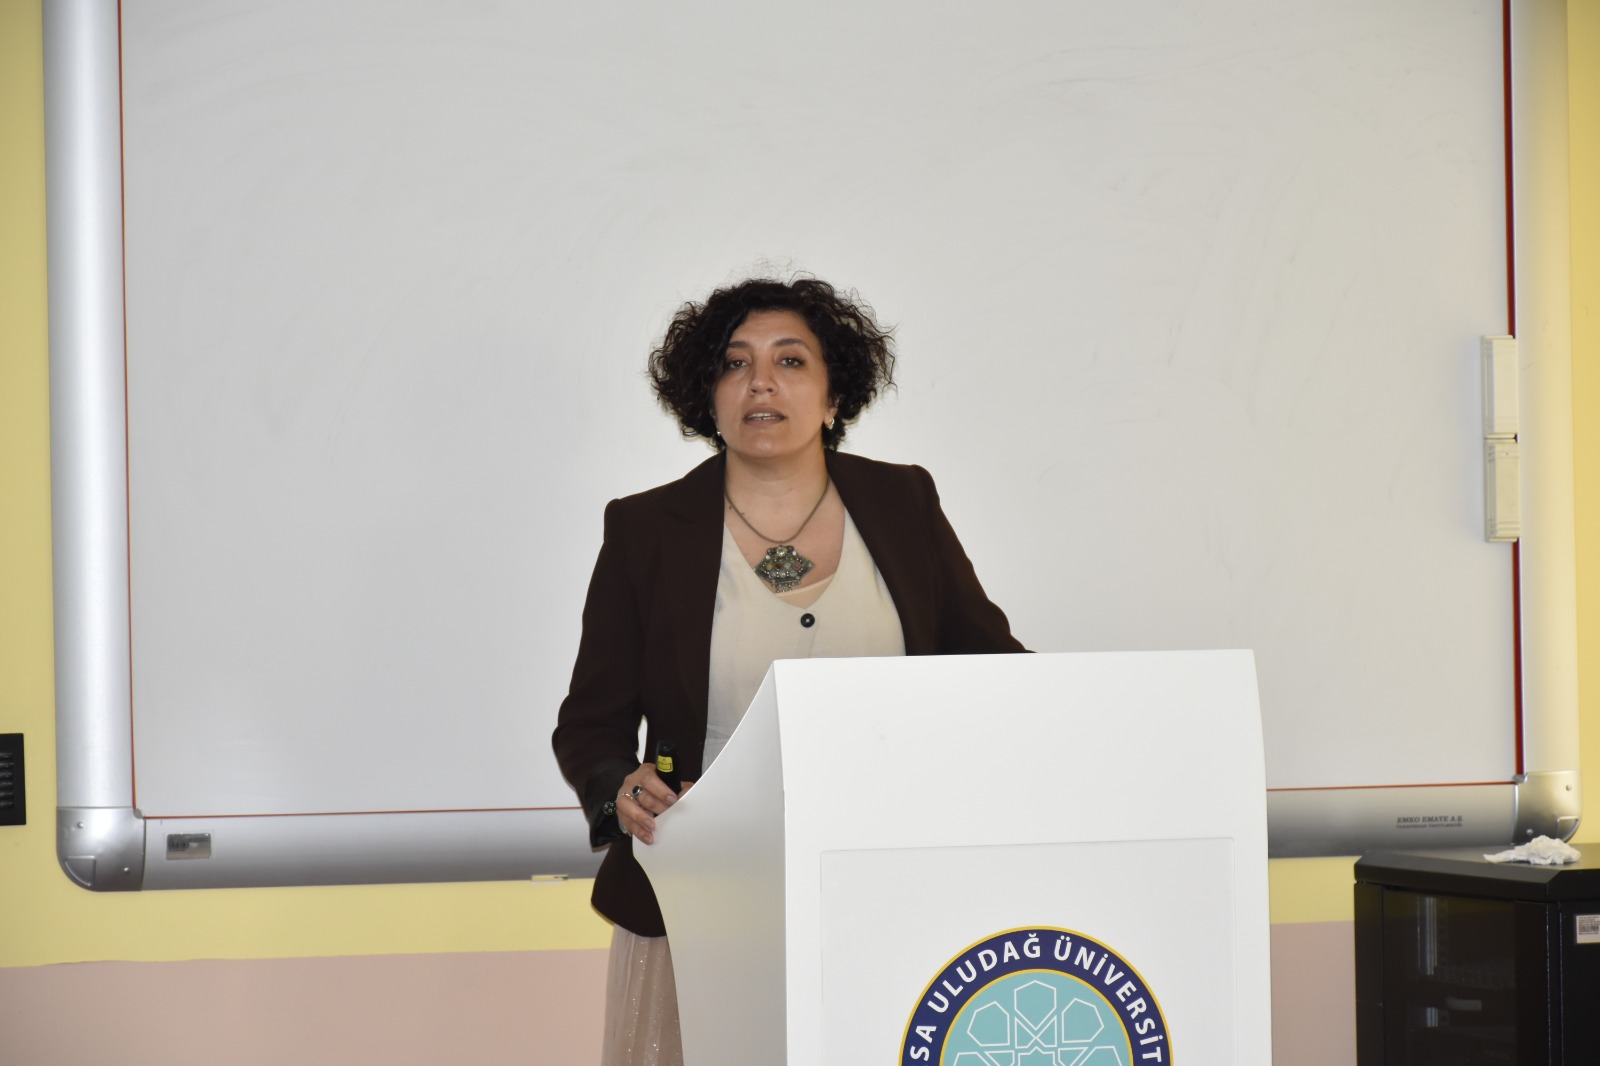 Coordinator of the Institute of Cultural Anthropology and Folklore at the International Symposium